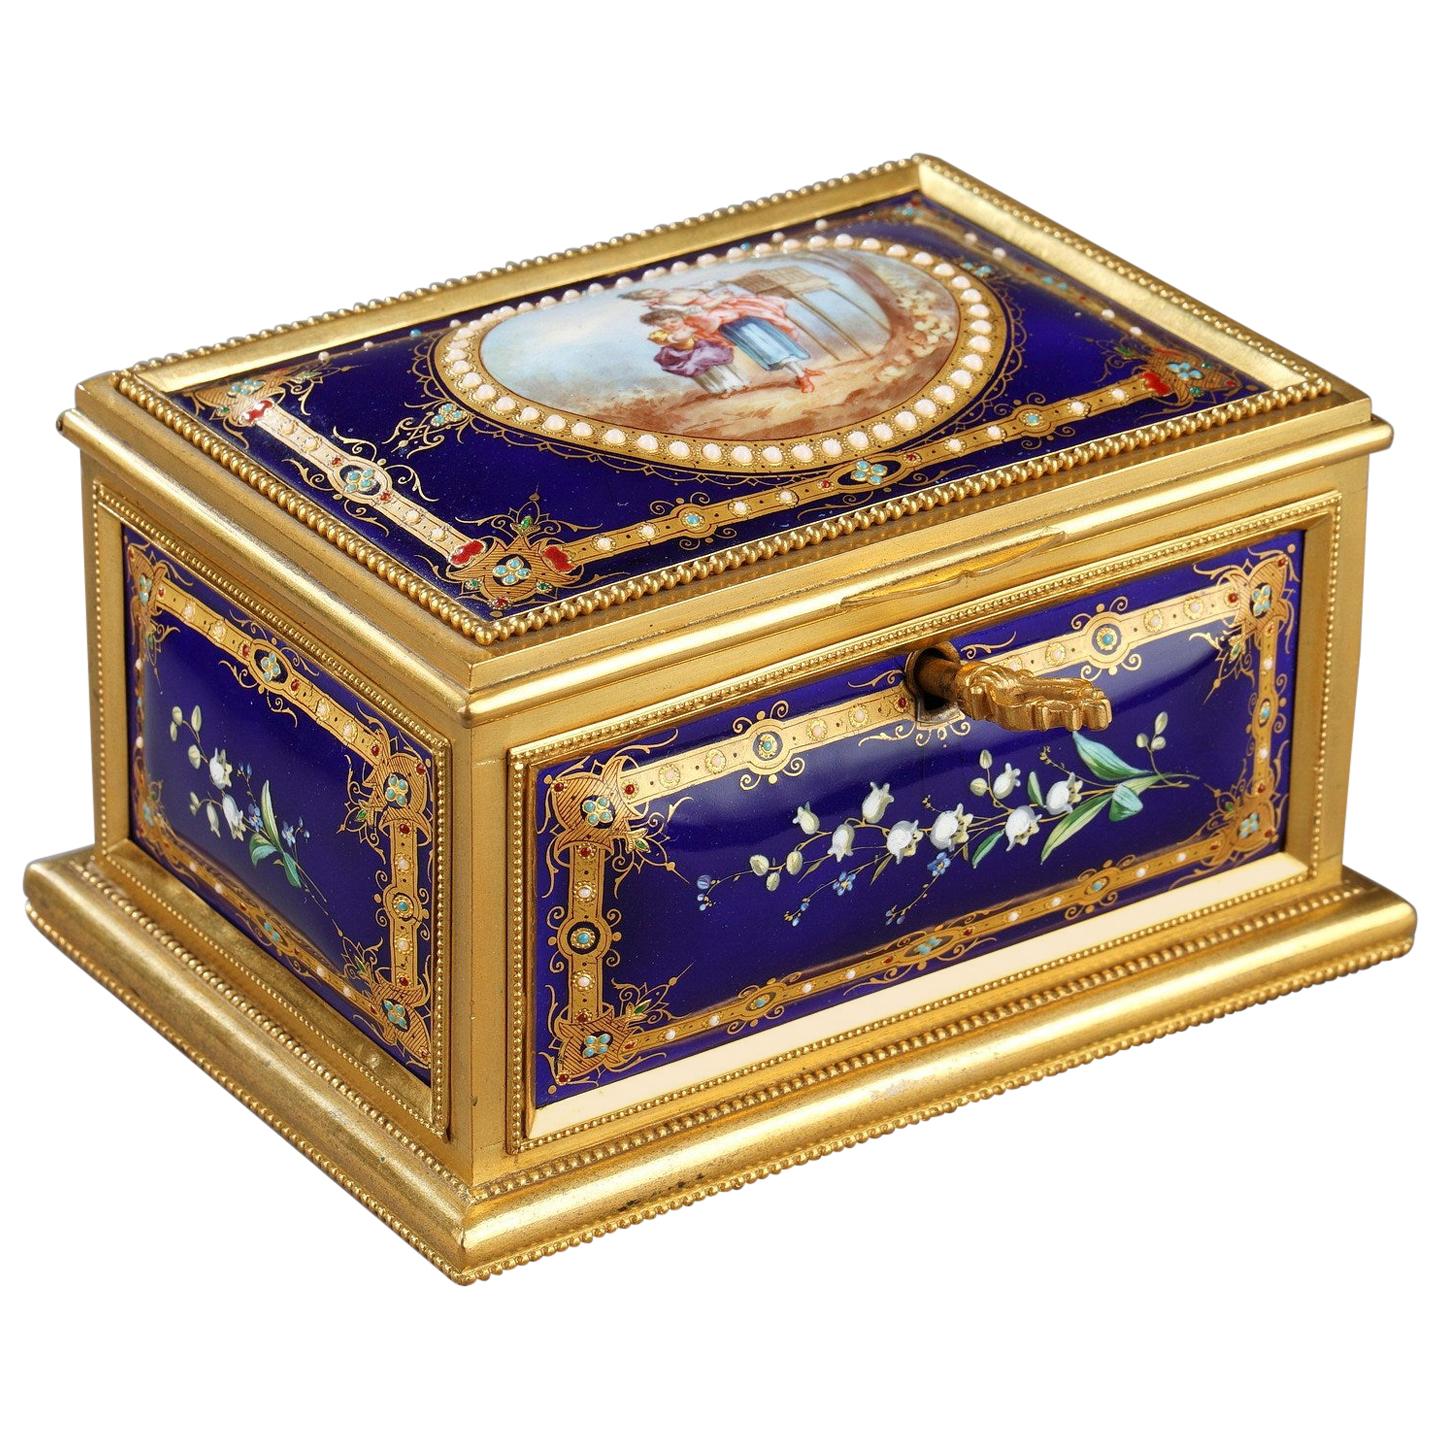 19th Century Casket in Enamel and Gilt Bronze Mount, Signed Tahan